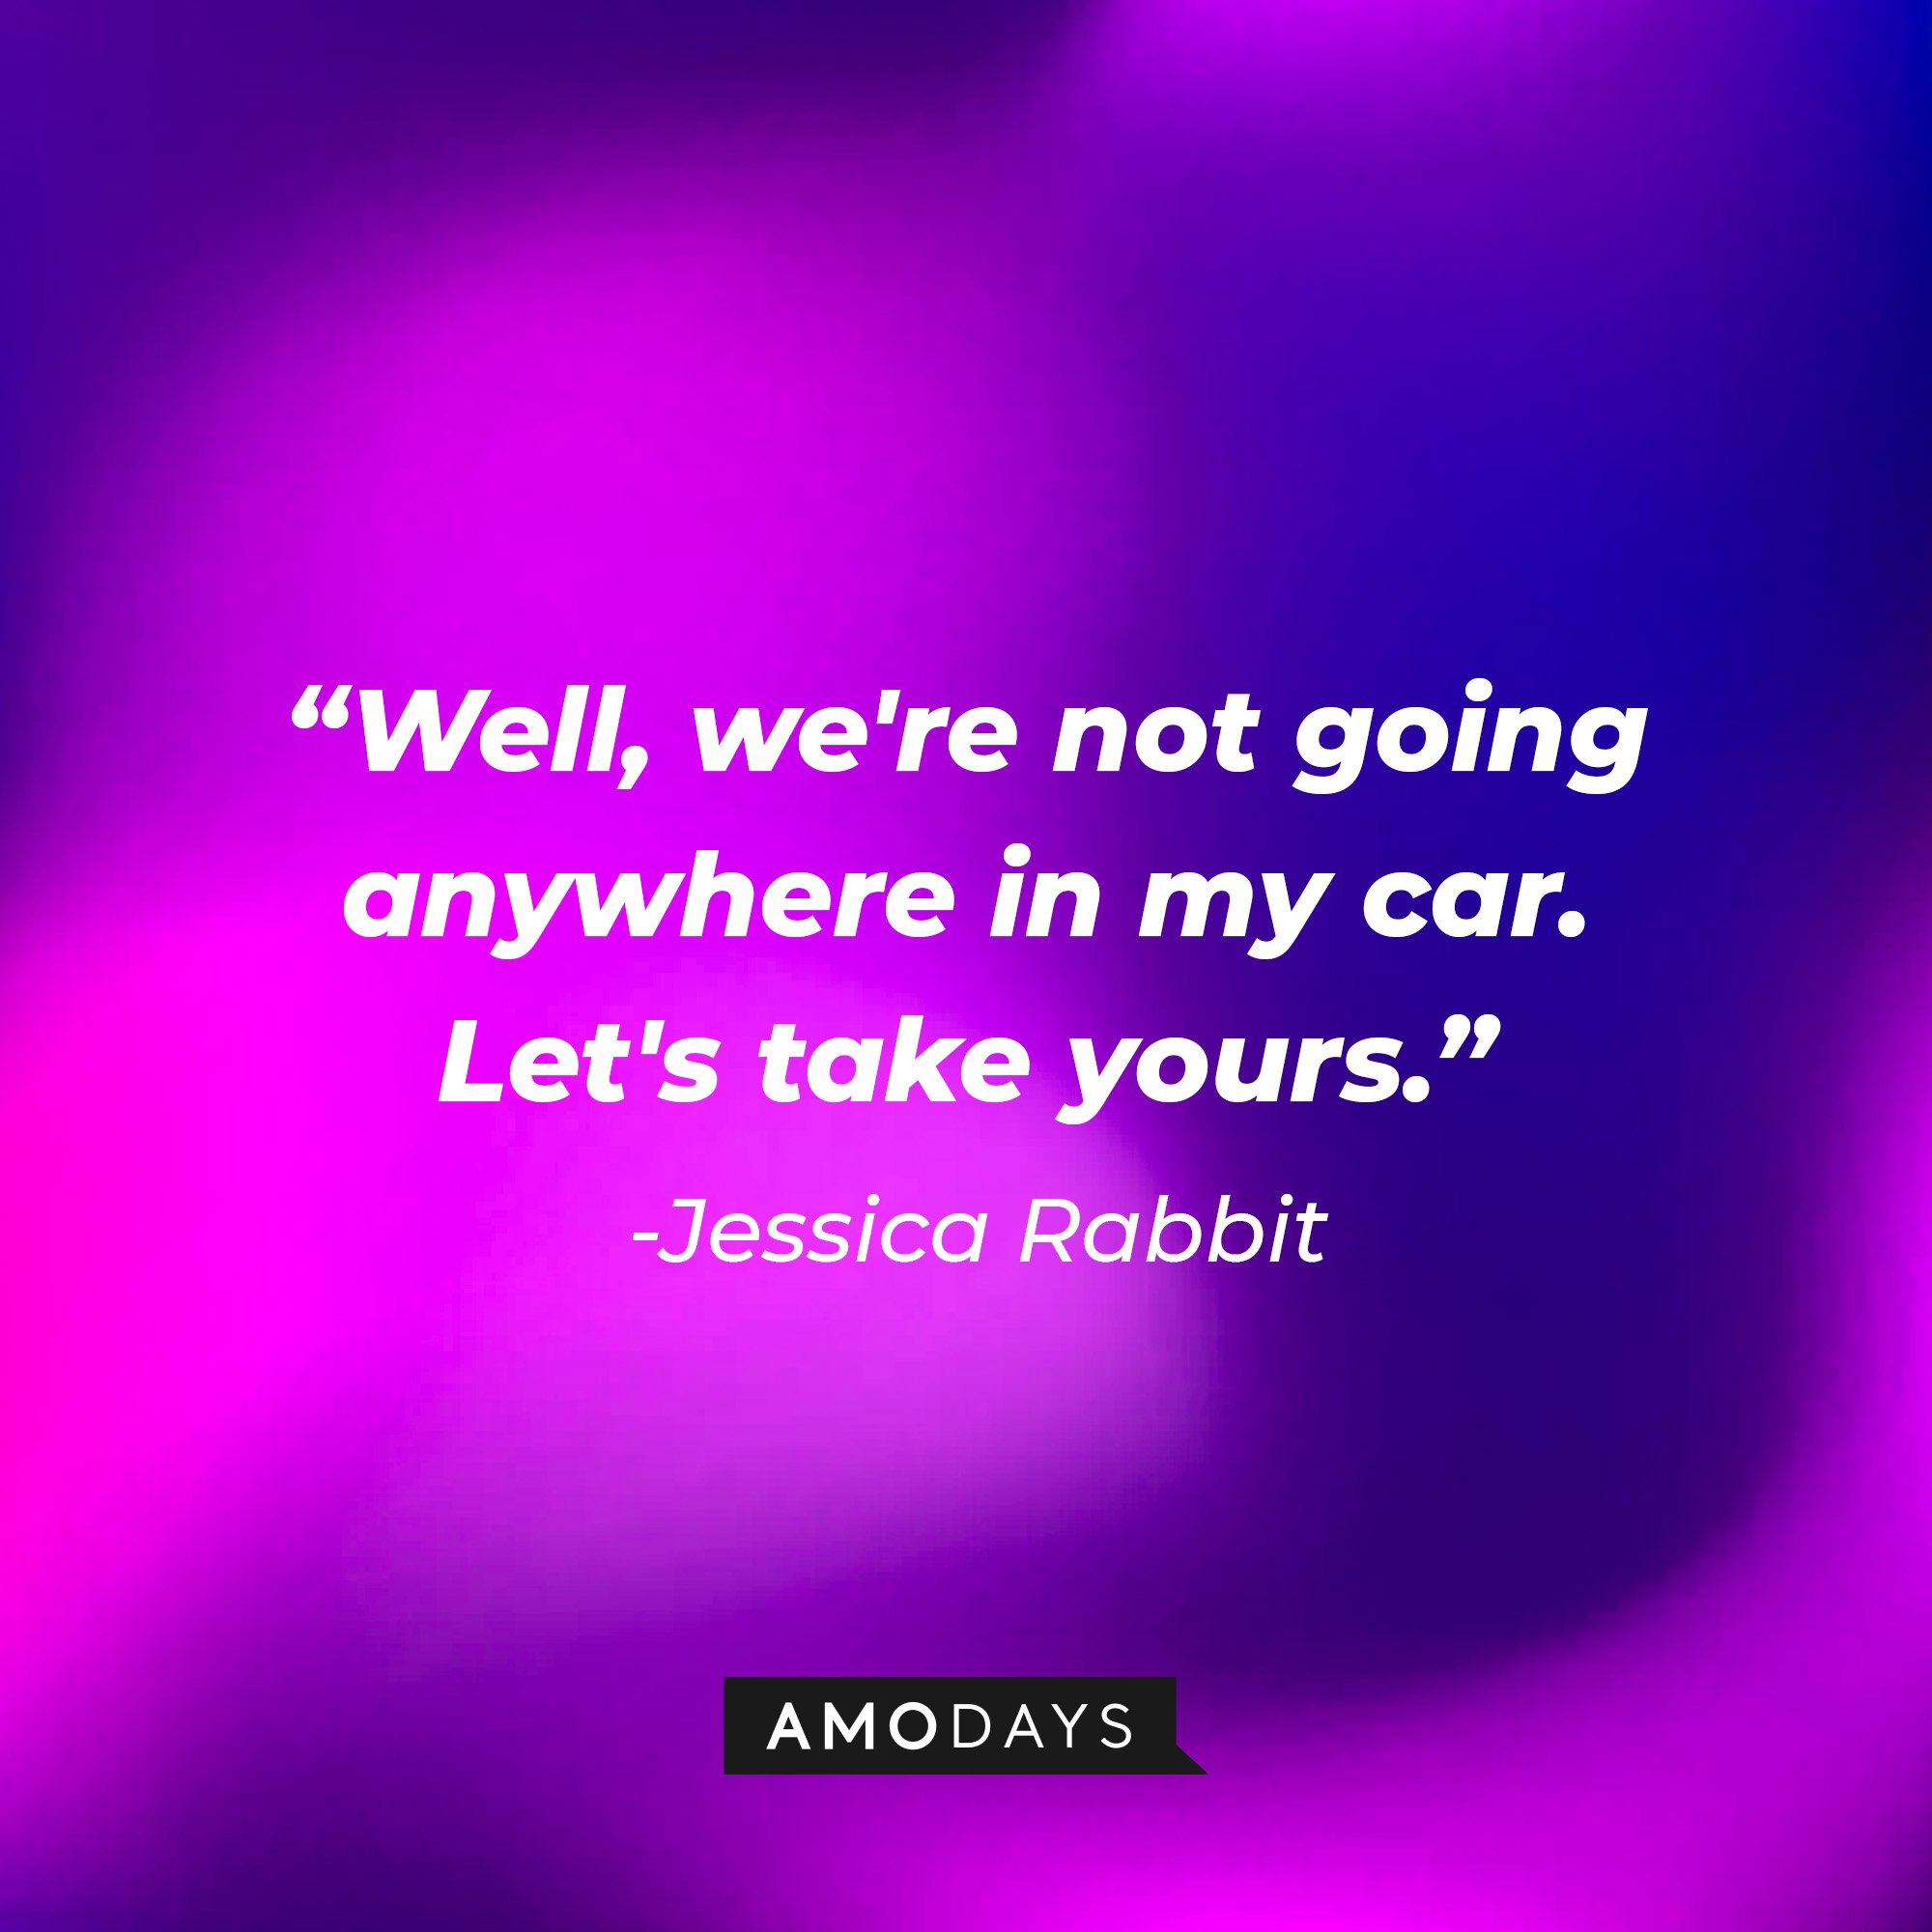 Jessica Rabbit’s quote: "Well, we're not going anywhere in my car. Let's take yours." | Image: AmoDays